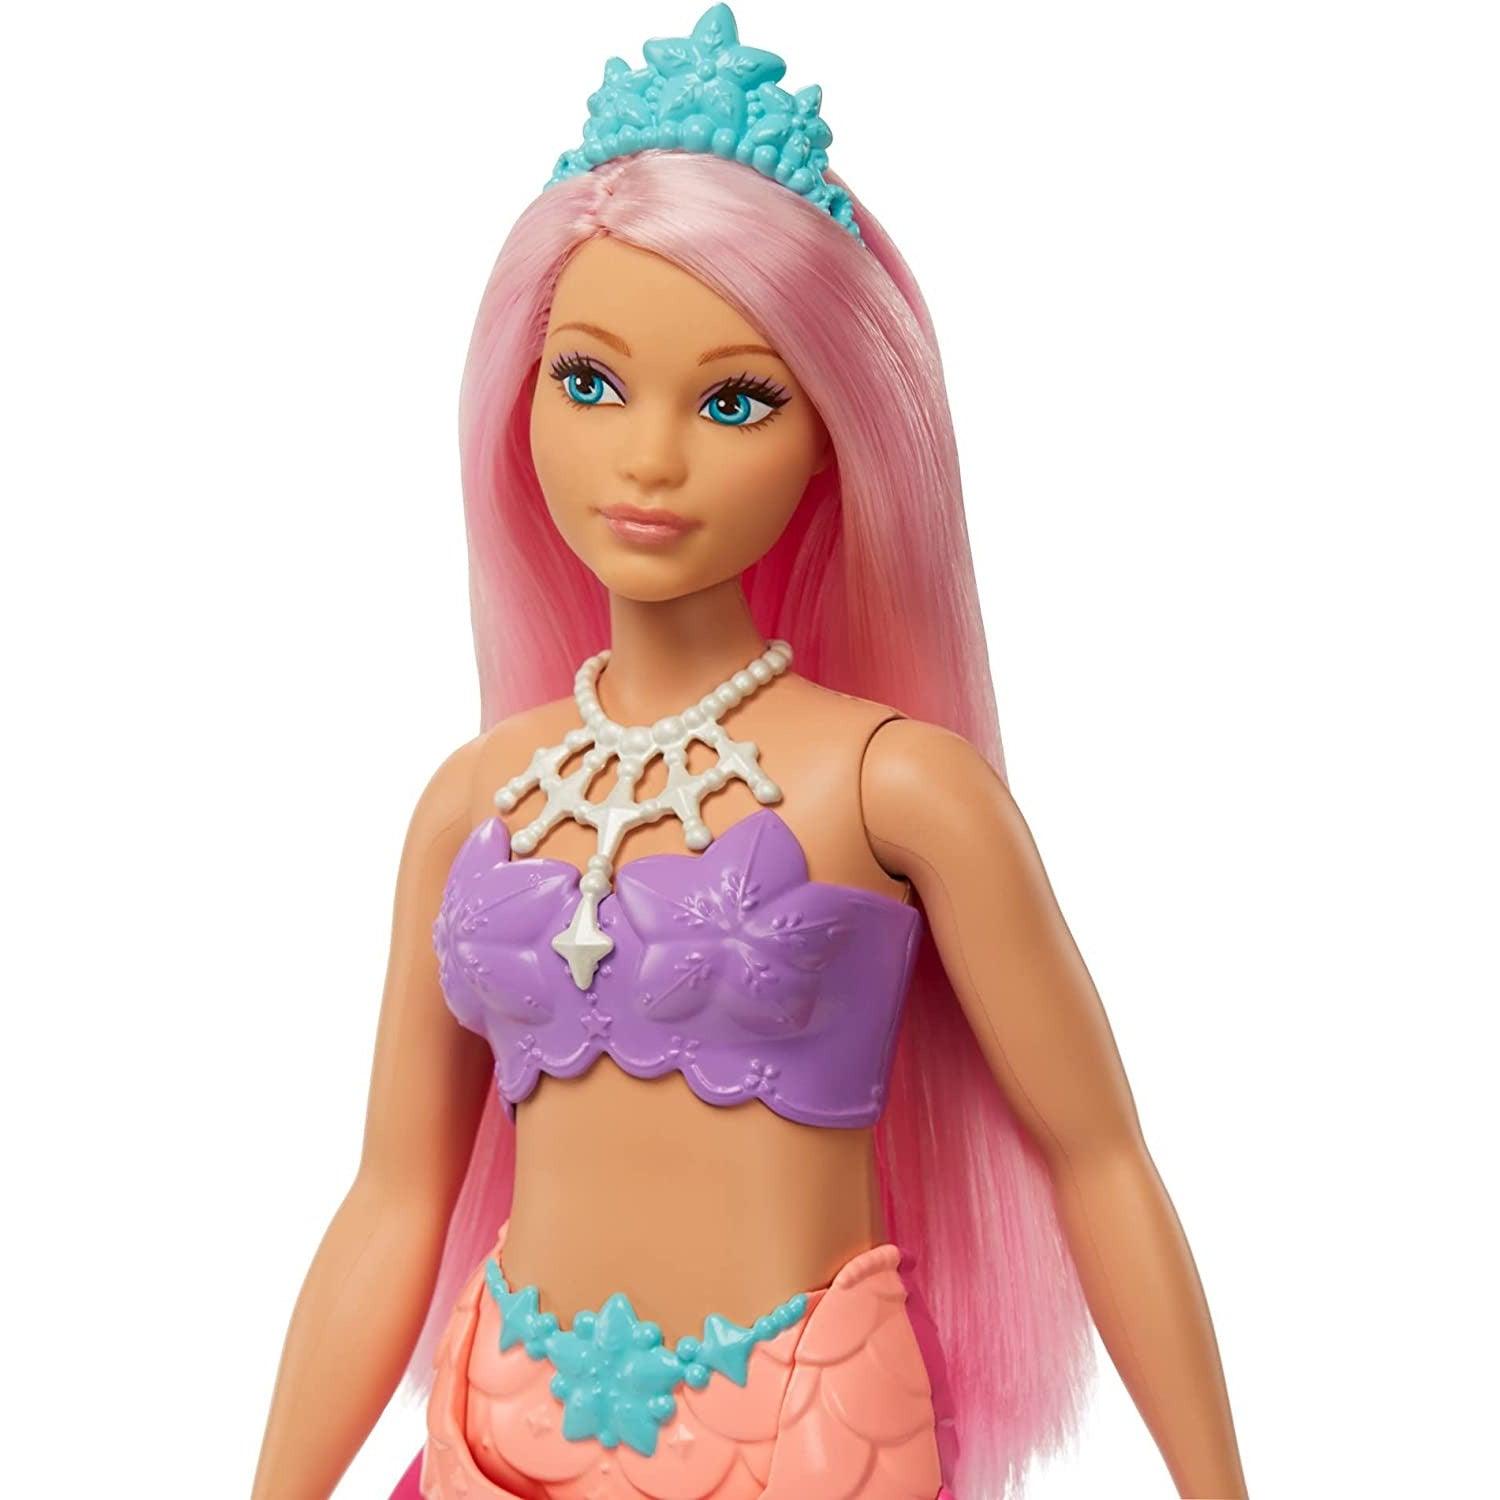 Barbie Dreamtopia Mermaid Doll (Curvy, Pink Hair) with Pink Ombre Mermaid Tail and Tiara - BumbleToys - 5-7 Years, Barbie, Fashion Dolls & Accessories, Girls, Mermaid, Pre-Order